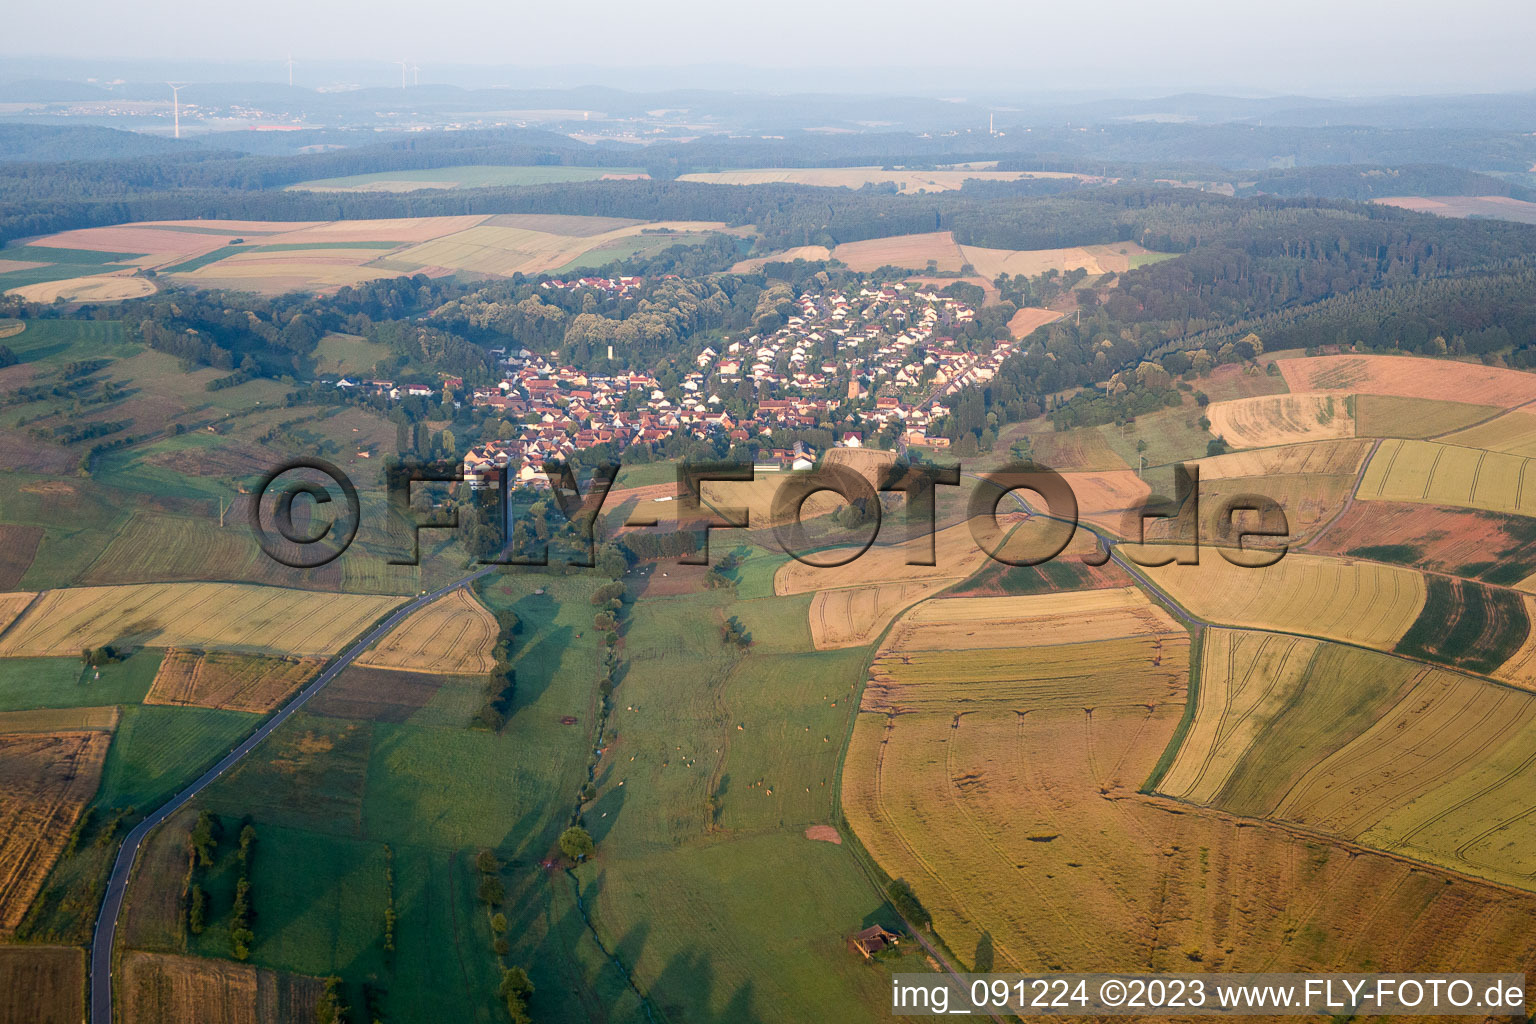 Sippersfeld in the state Rhineland-Palatinate, Germany